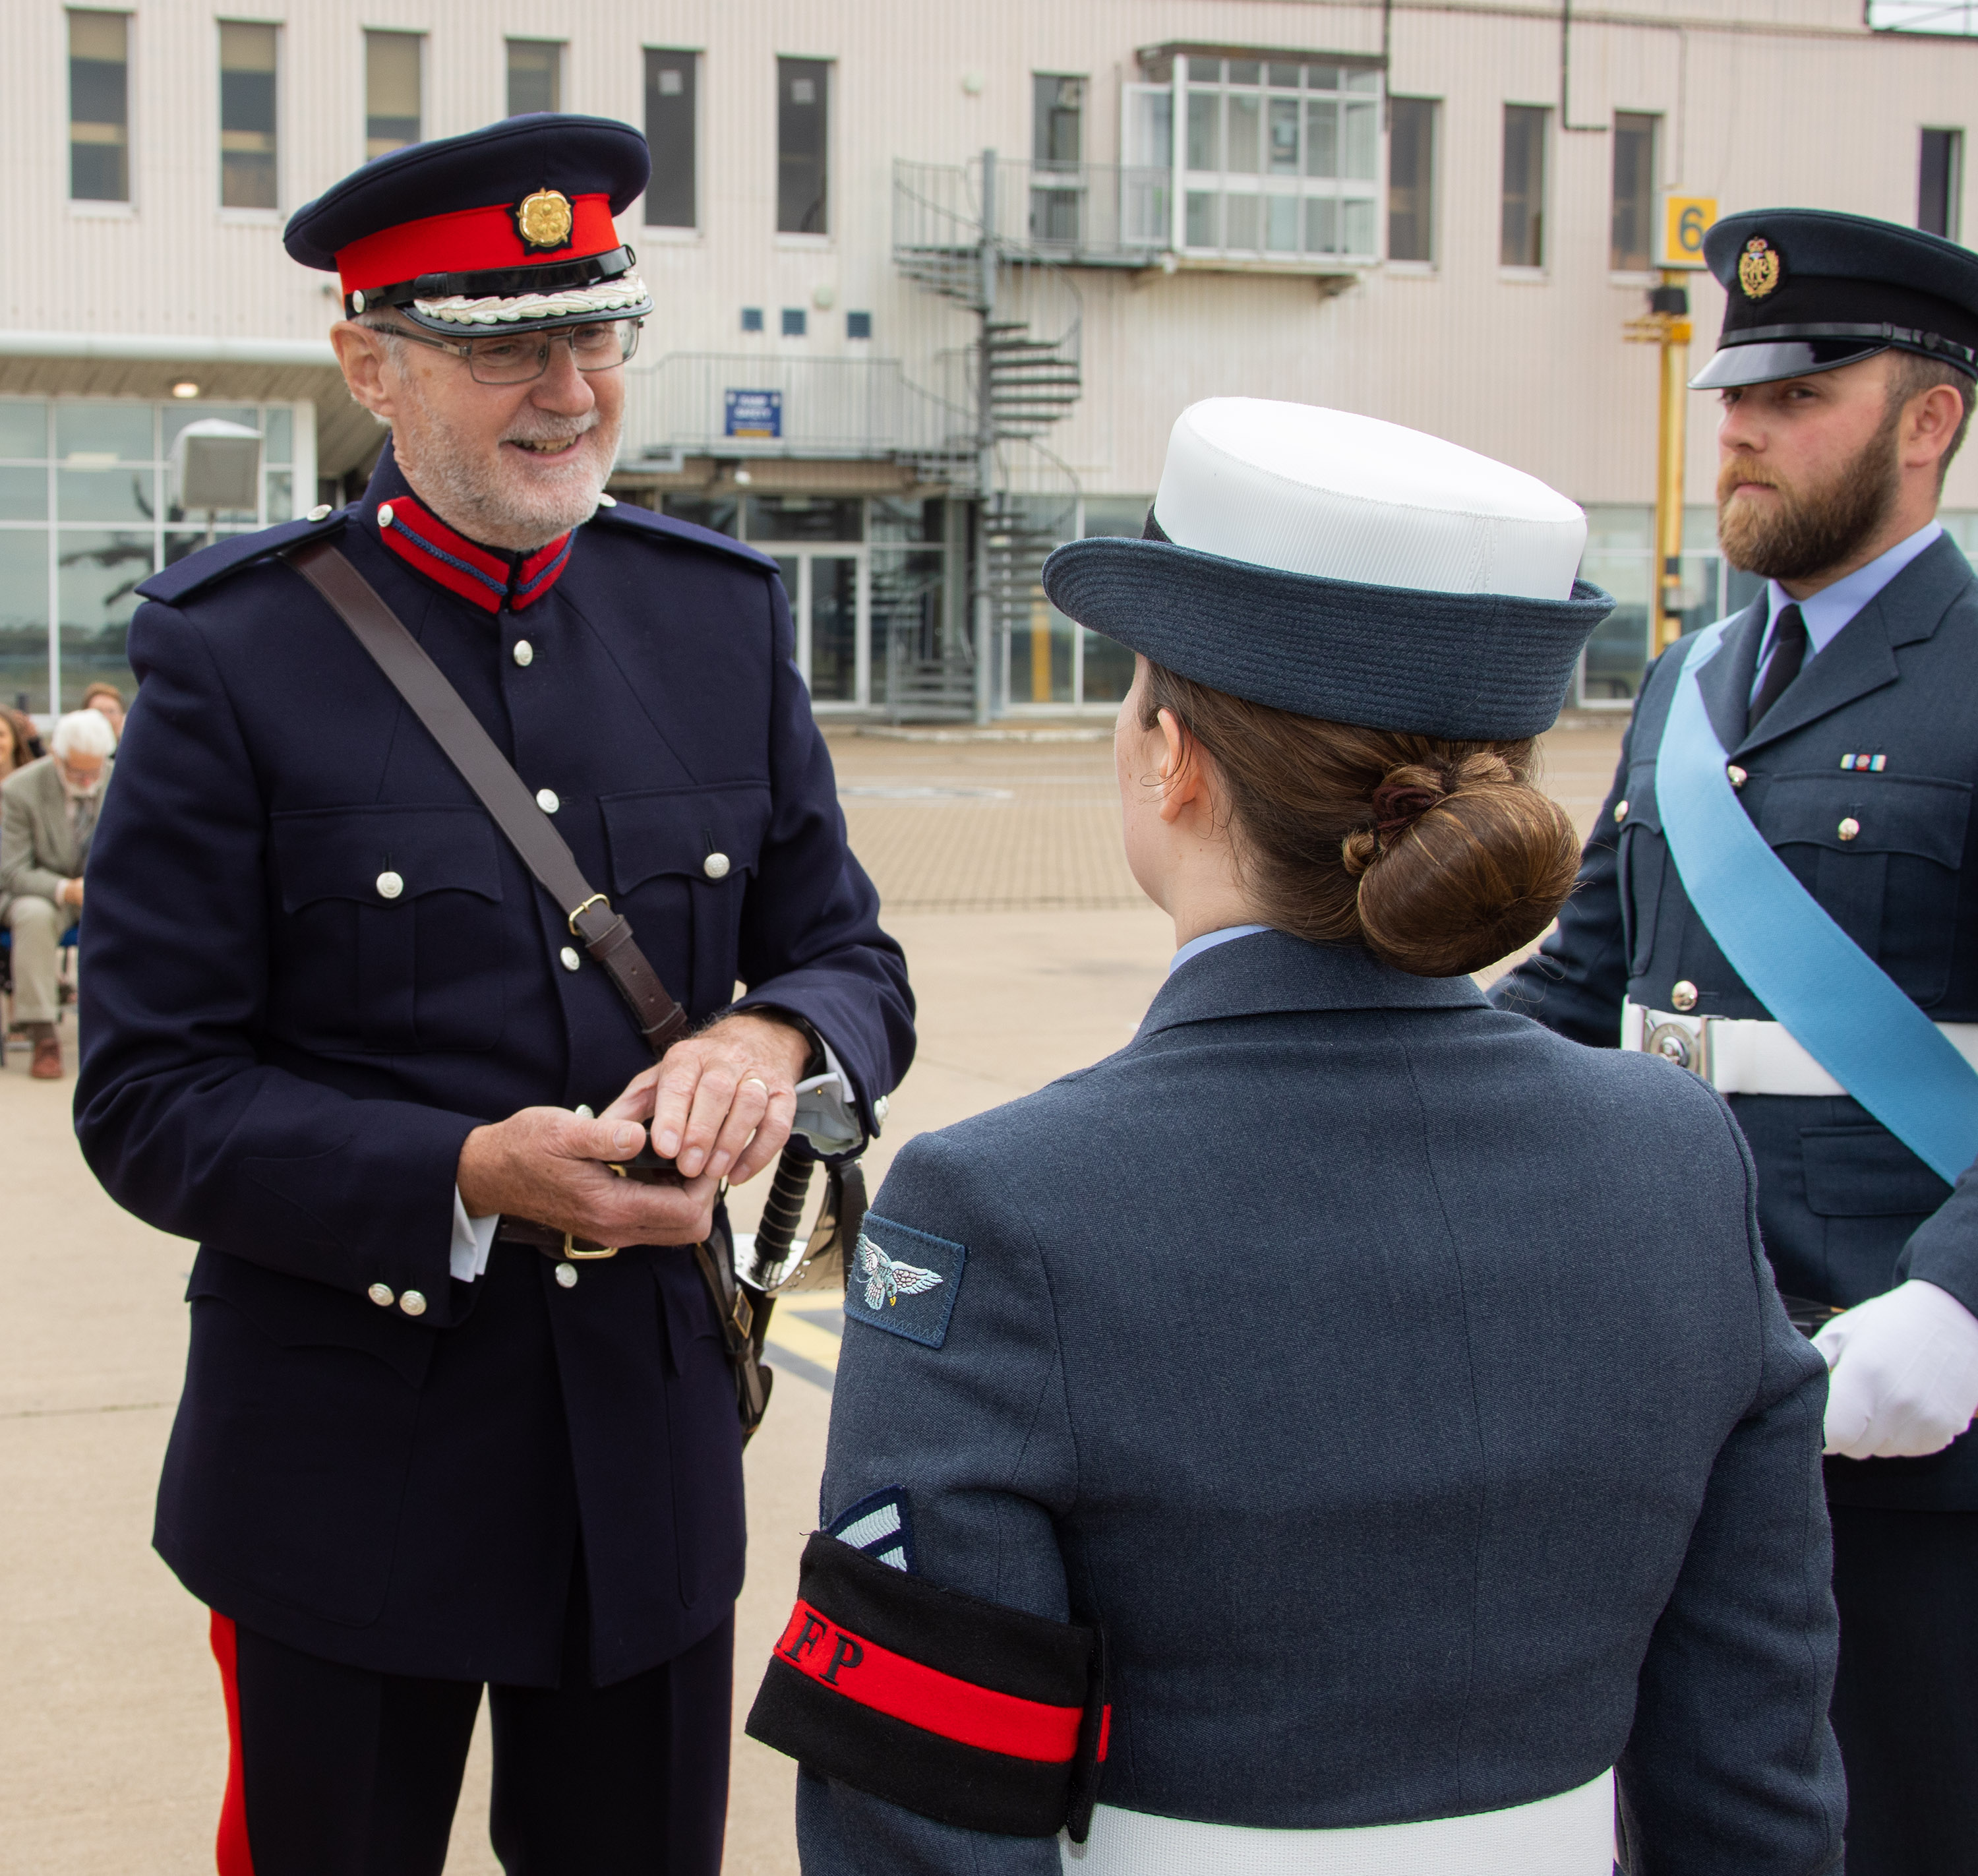 RAF Aviator presented with medal.